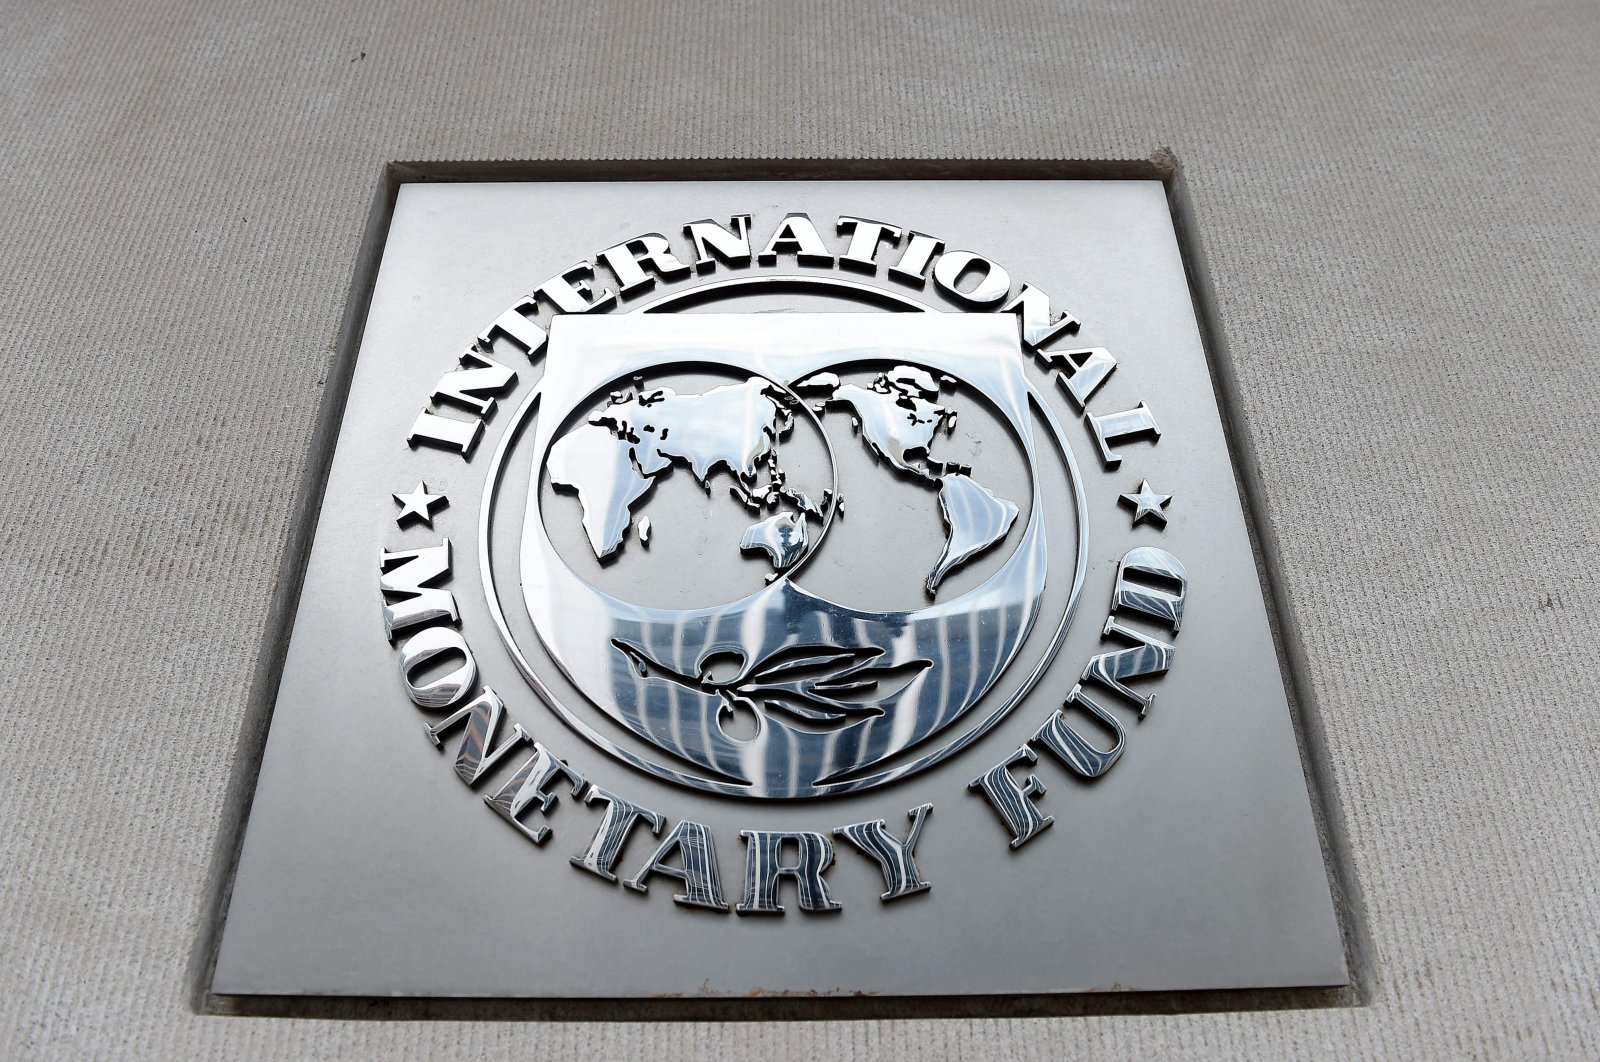 An exterior view of the International Monetary Fund building in Washington, D.C., March 27, 2020 (AFP Photo)